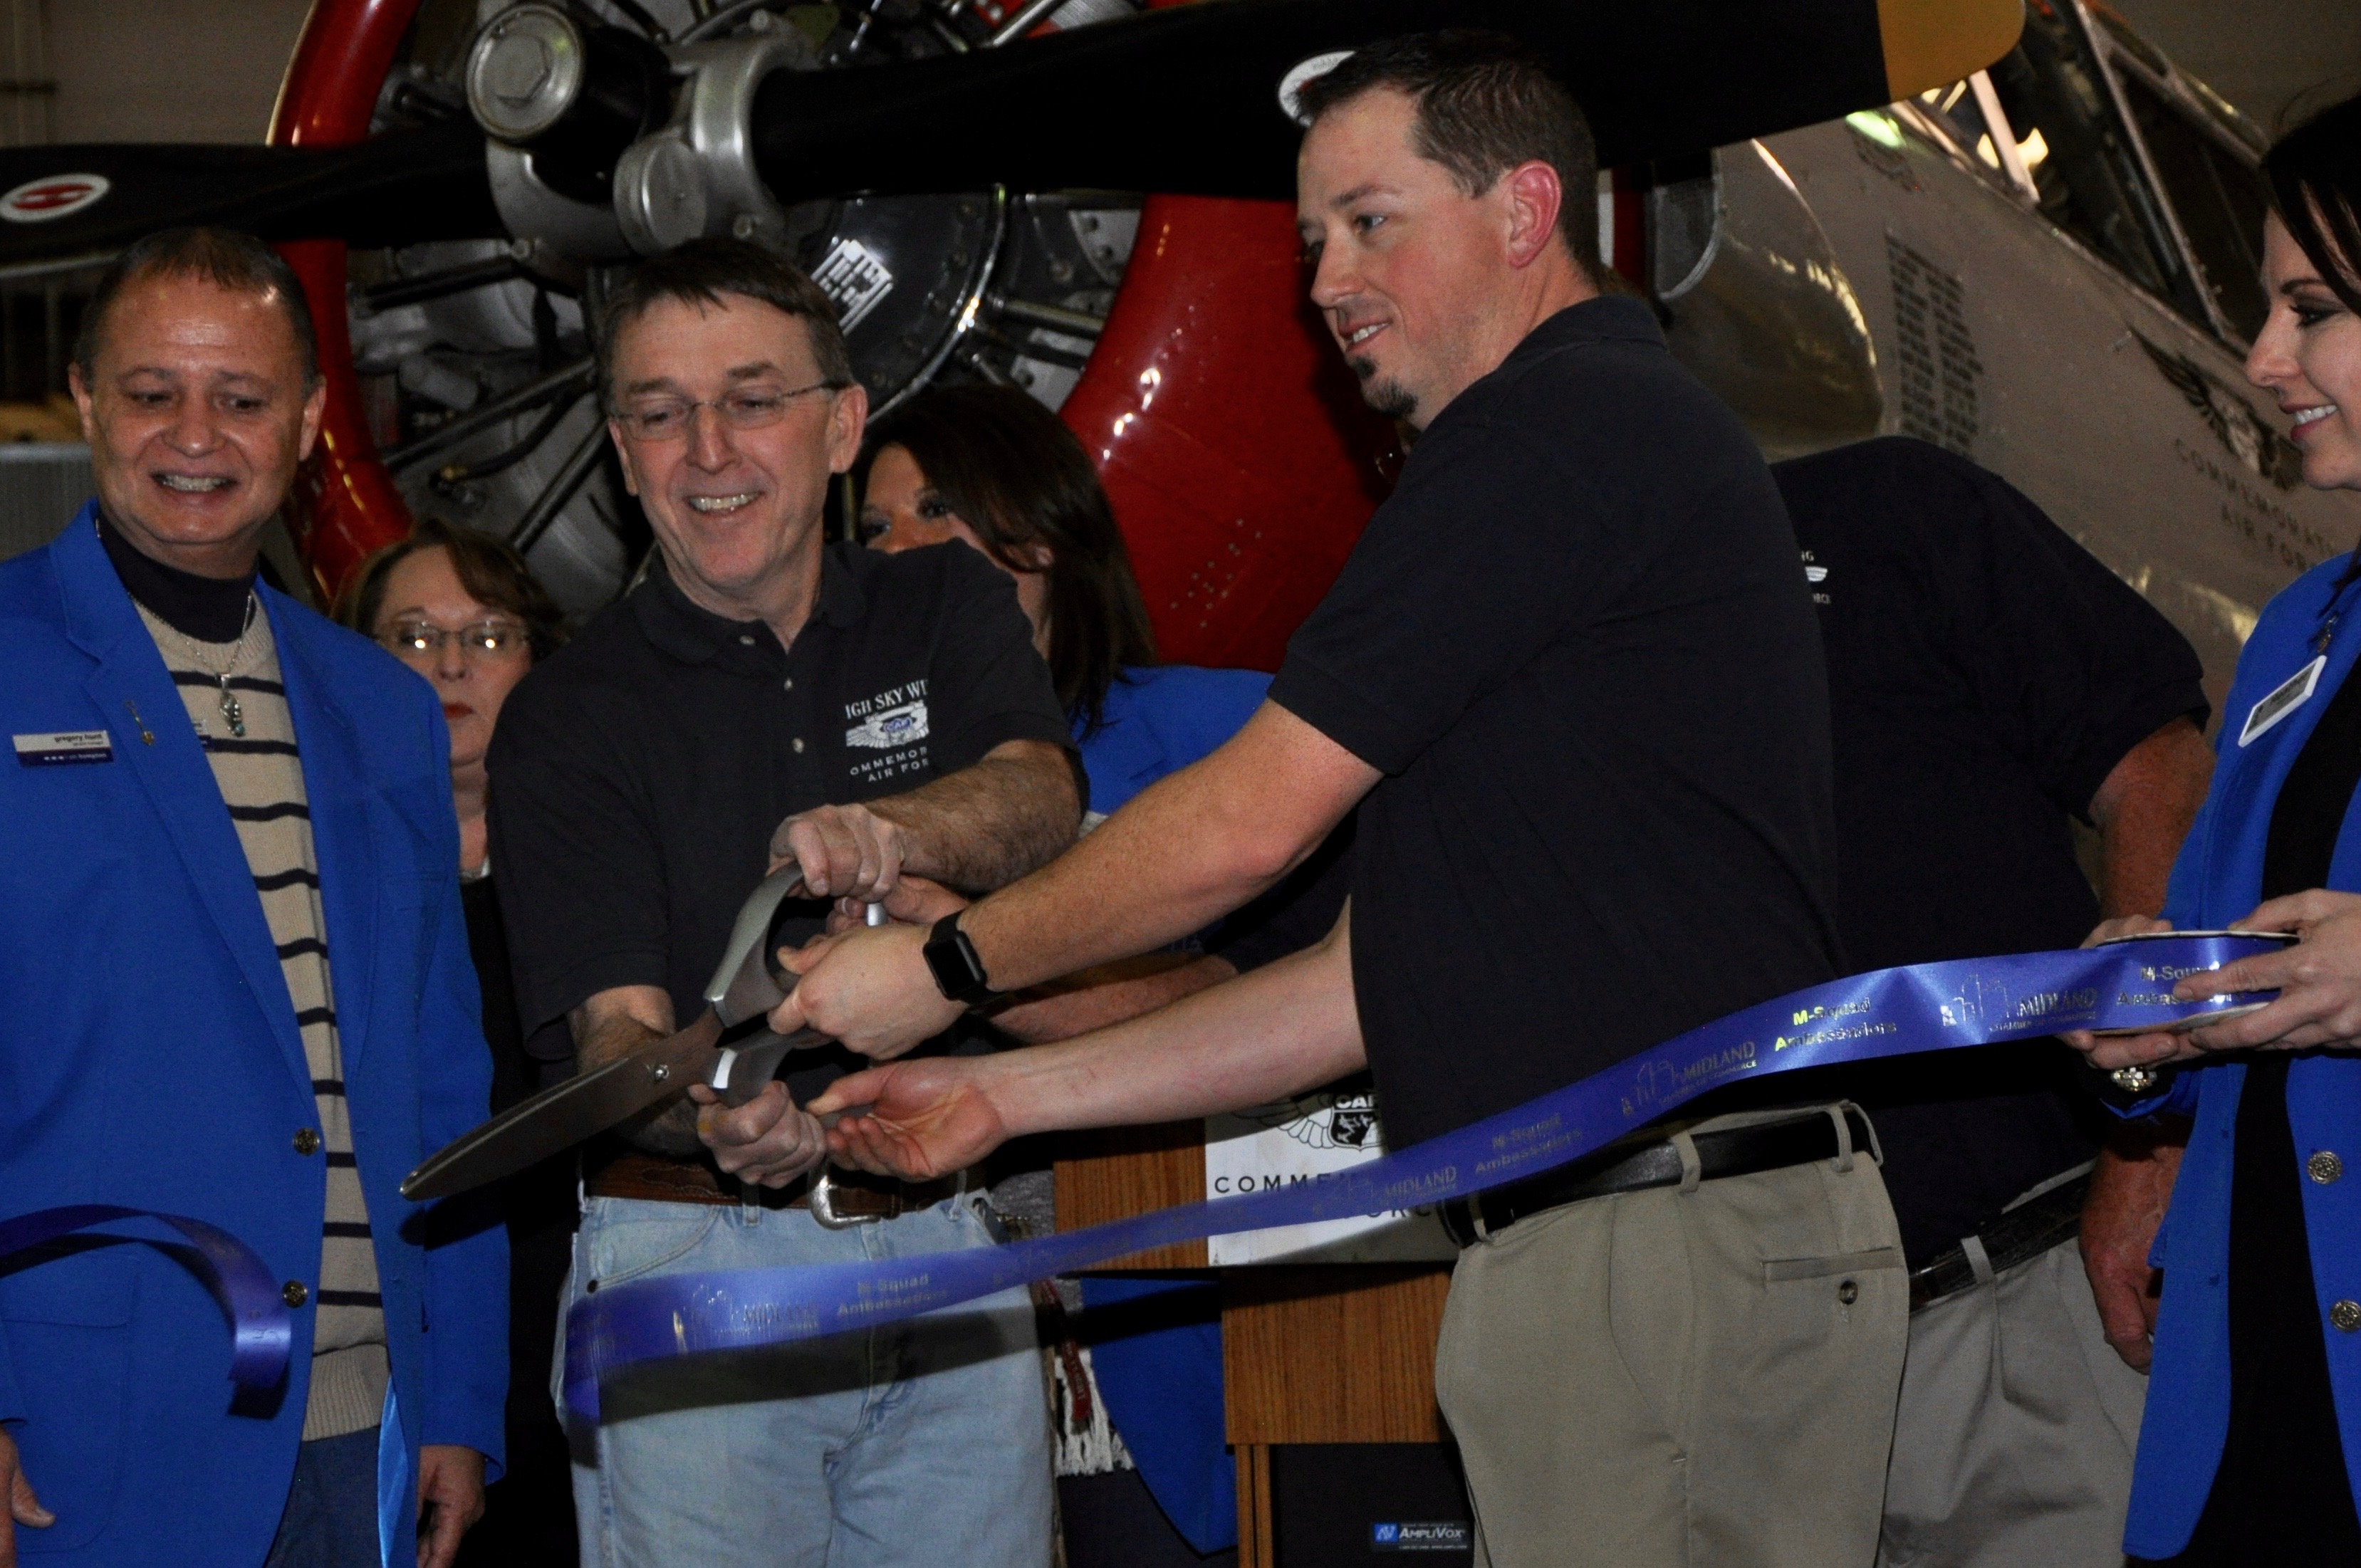 As Midland Chamber of Commerce members look on, Brent Collins, Mark Haskin (hidden) and Michael Clinton cut the ribbon officially opening the Midland Army Air Field Museum.